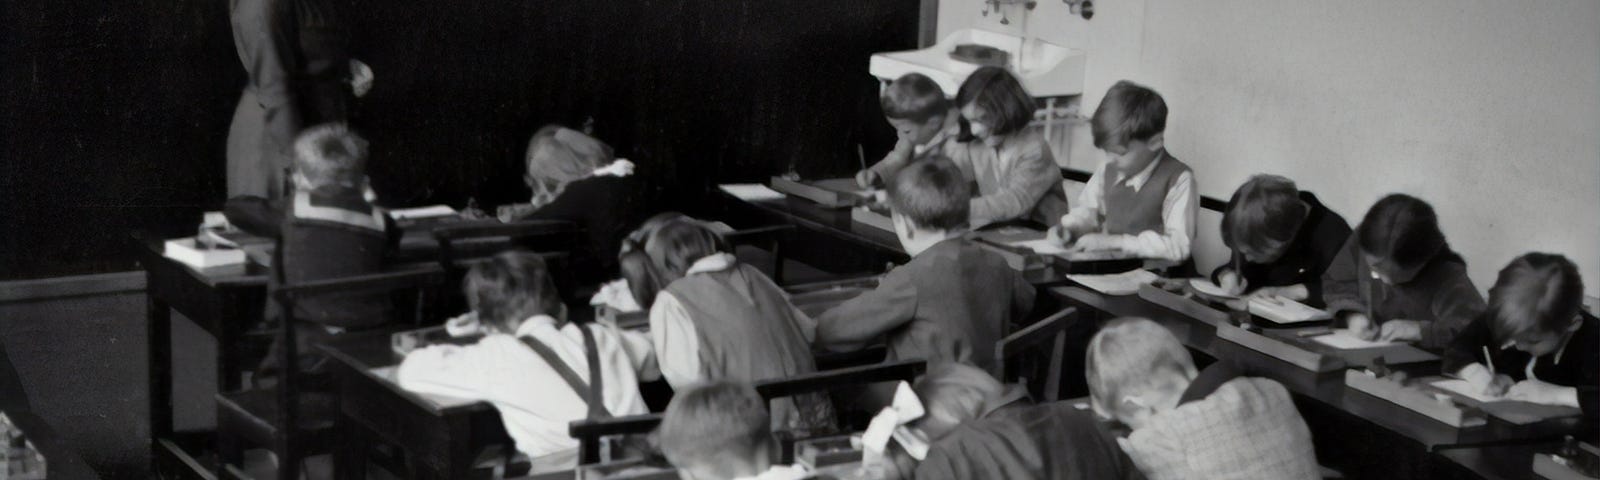 A group of school children busy at work.